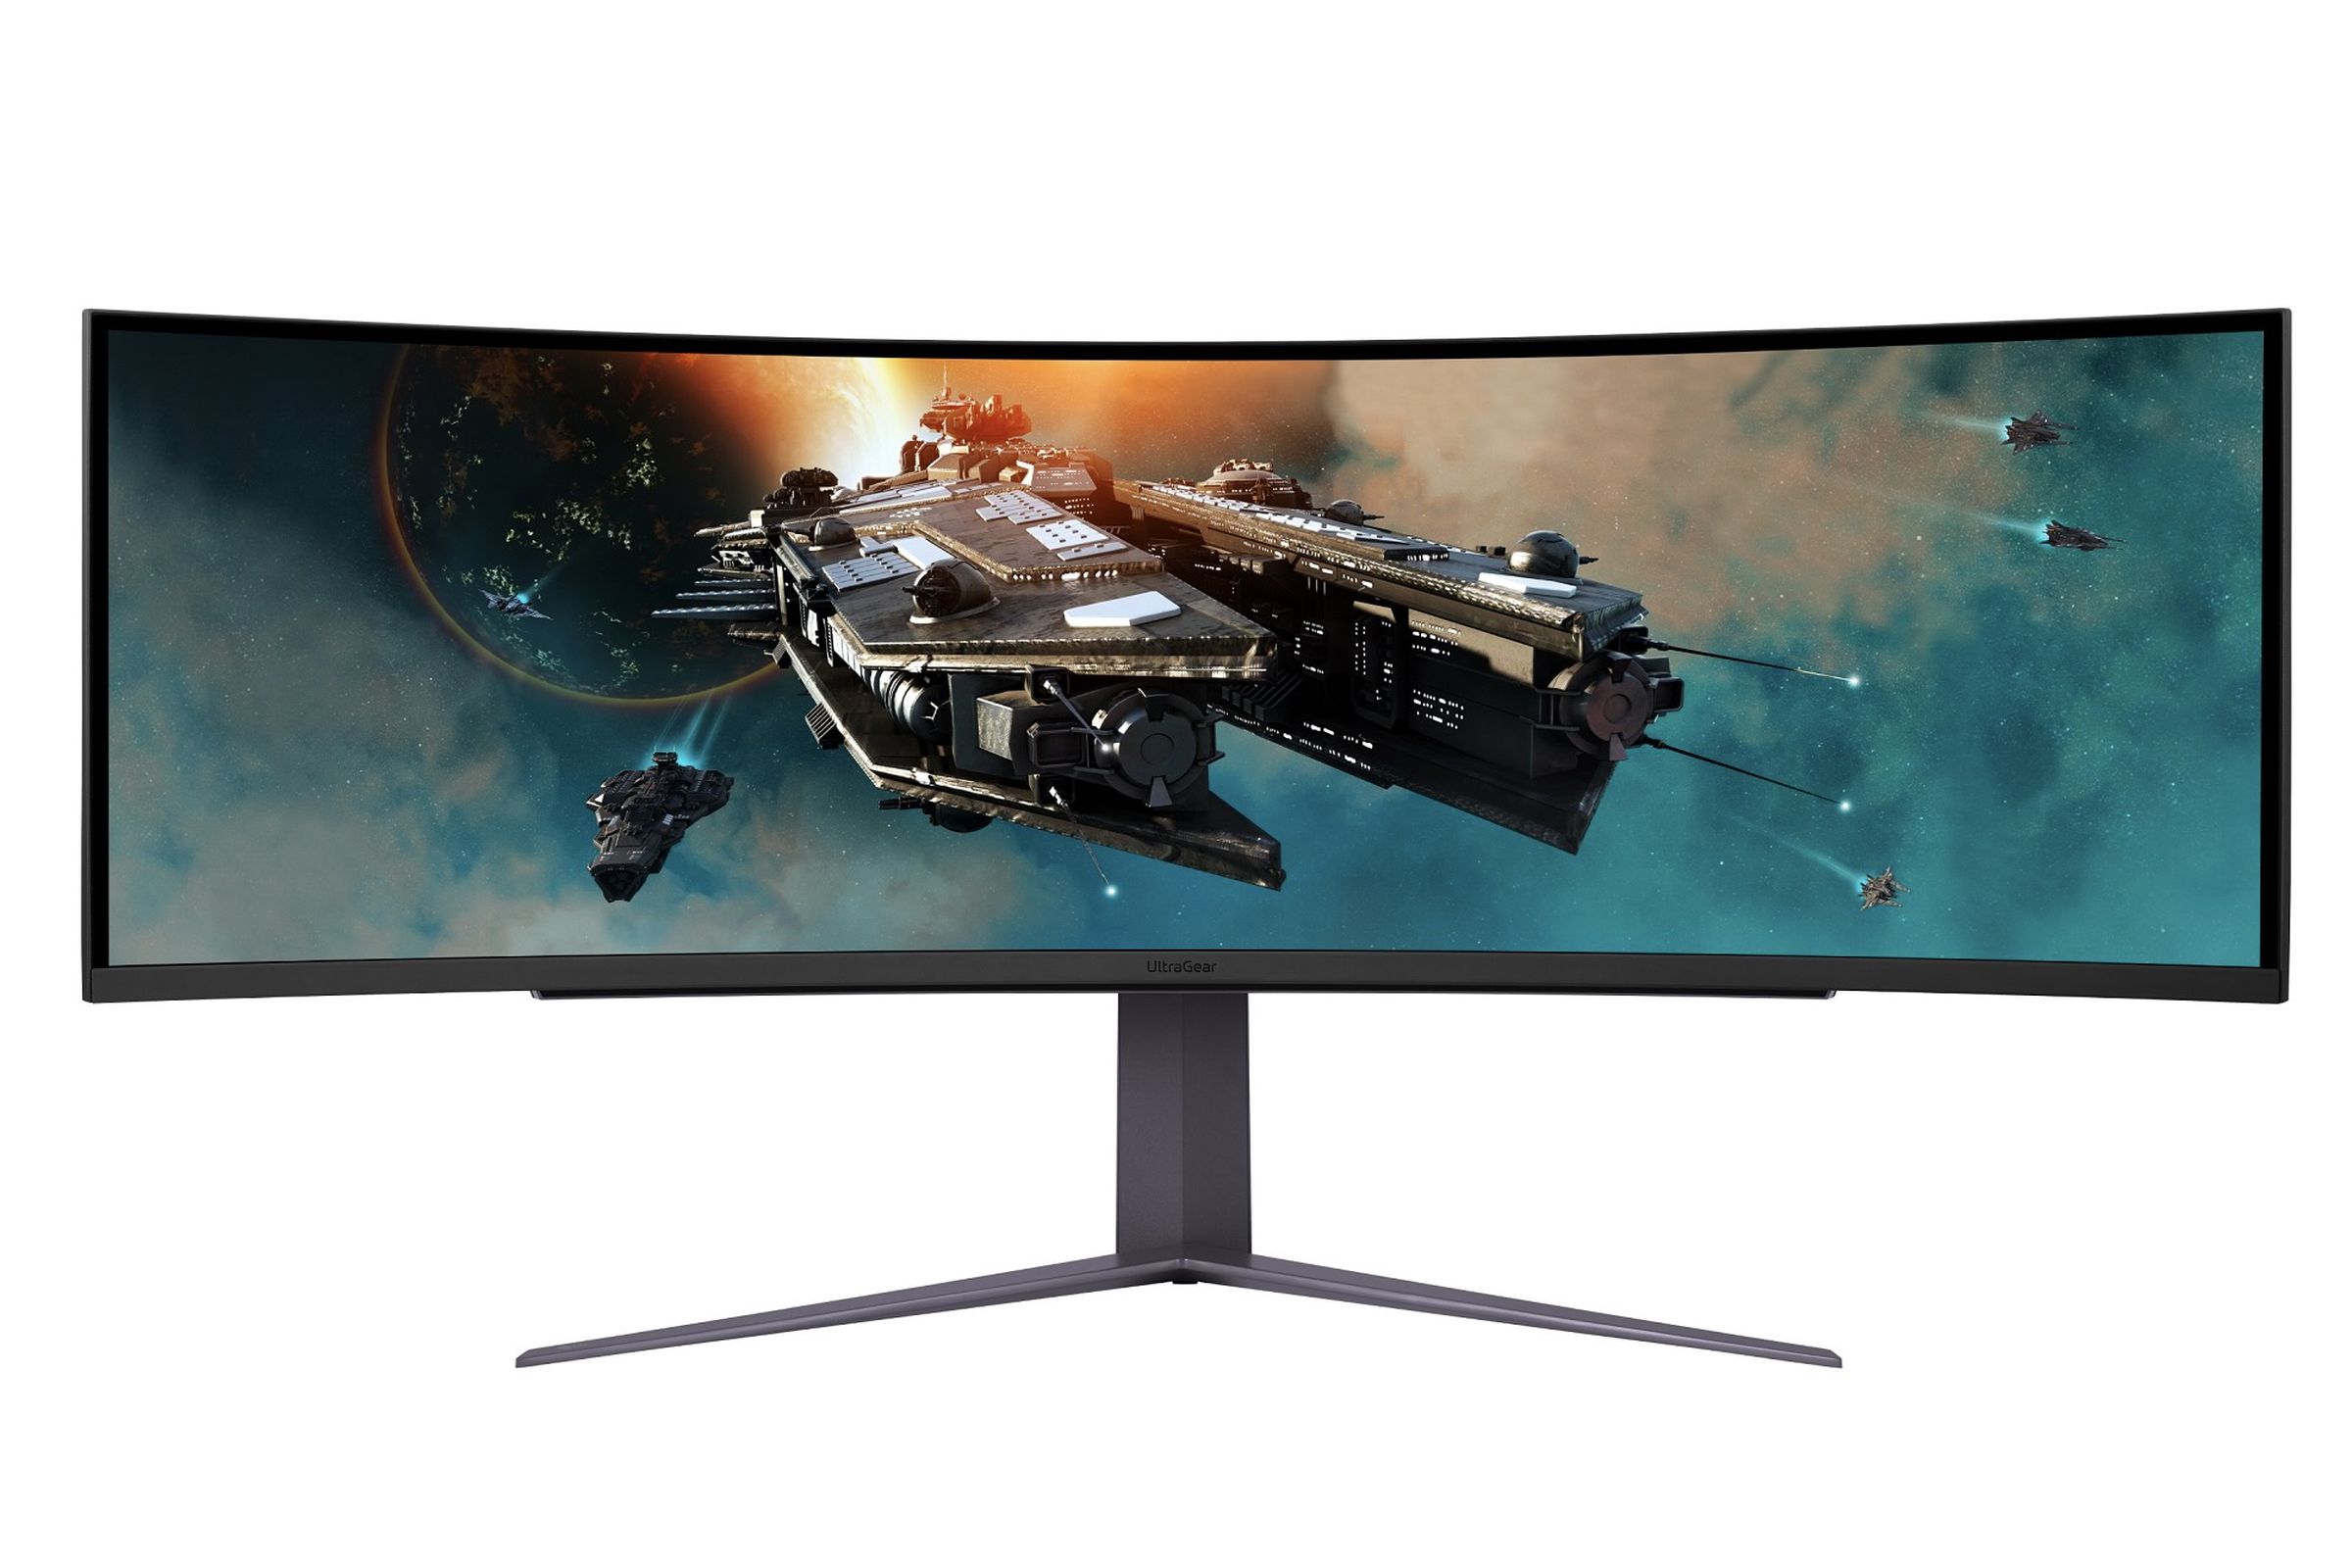 LG ultragear 49-inch curved monitor has a V shaped stand and an off-set chin with a shiny “ultragear” etching